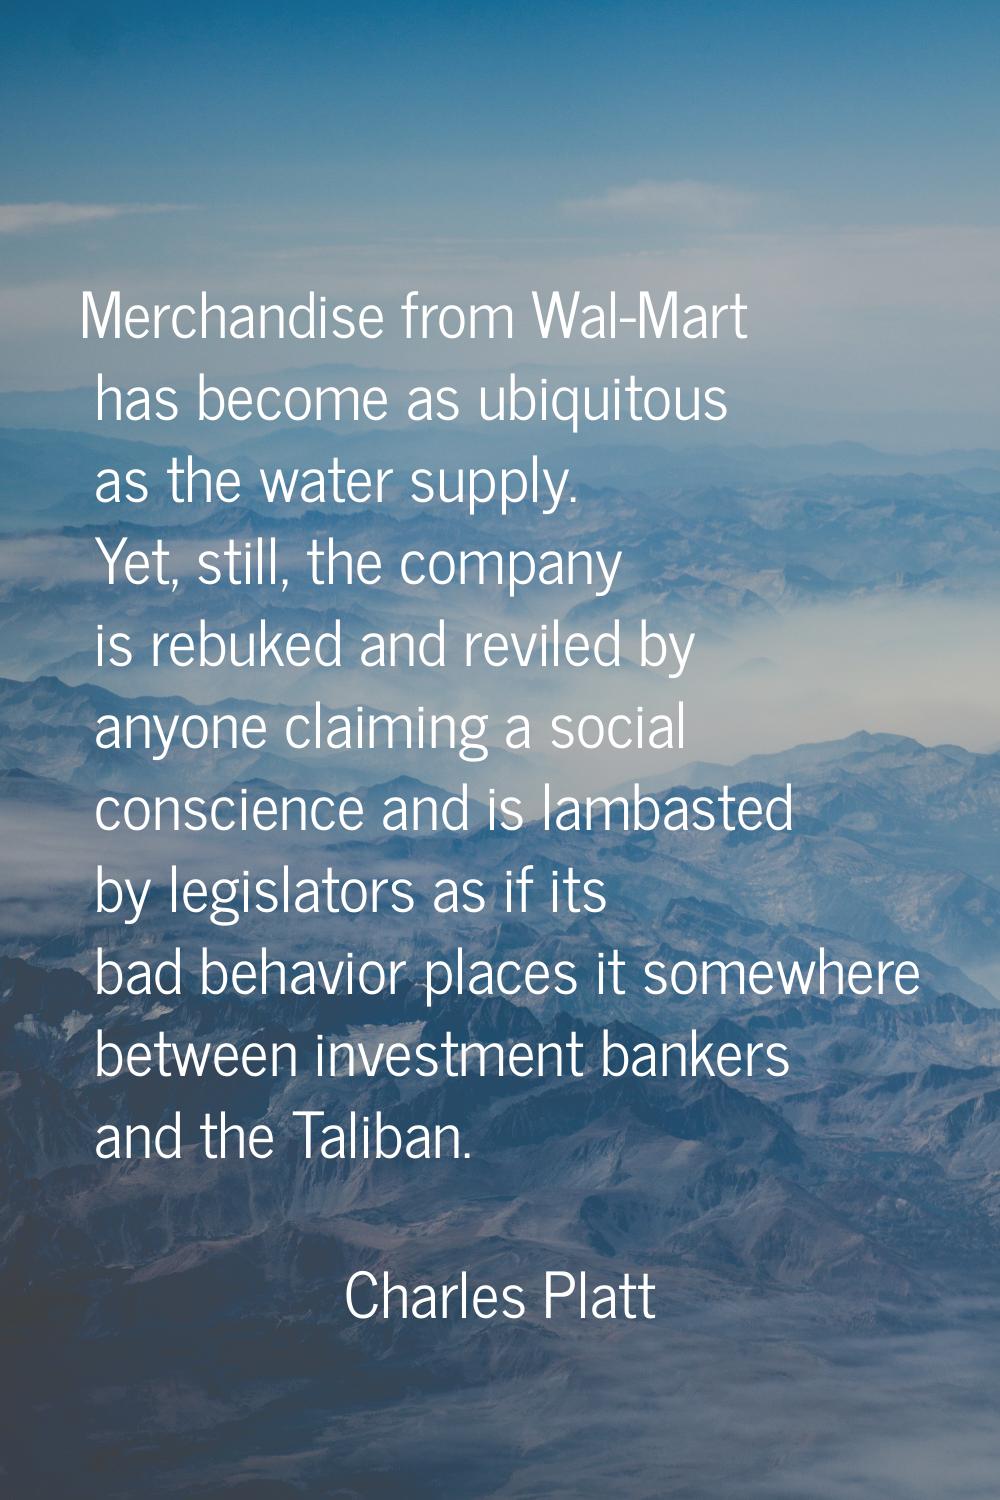 Merchandise from Wal-Mart has become as ubiquitous as the water supply. Yet, still, the company is 